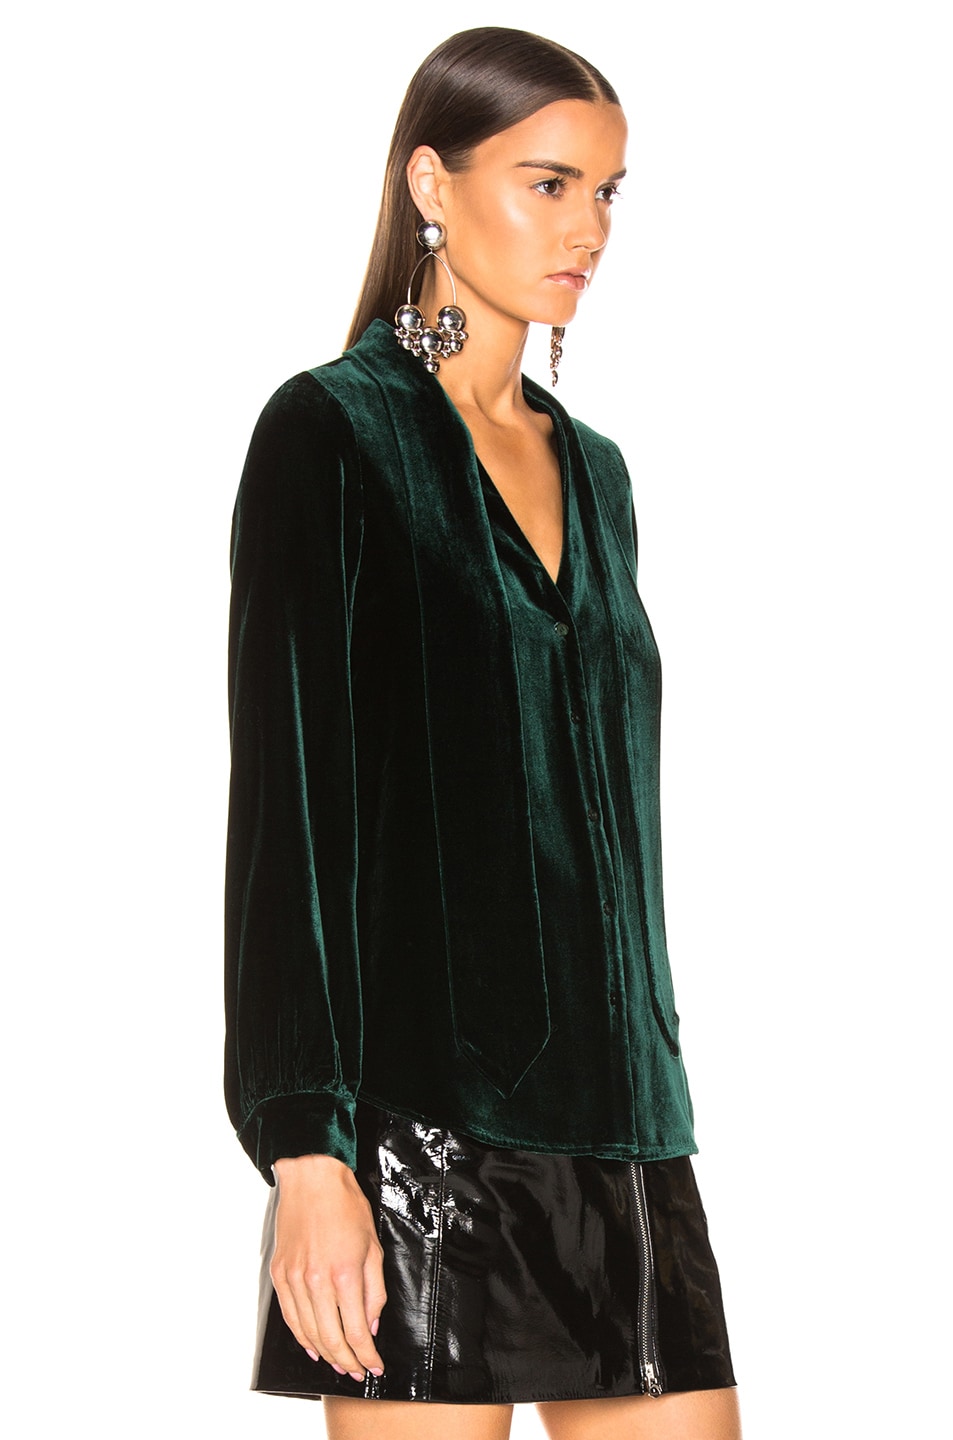 L'AGENCE Gisele Neck Tie Blouse in Forest Green | FWRD